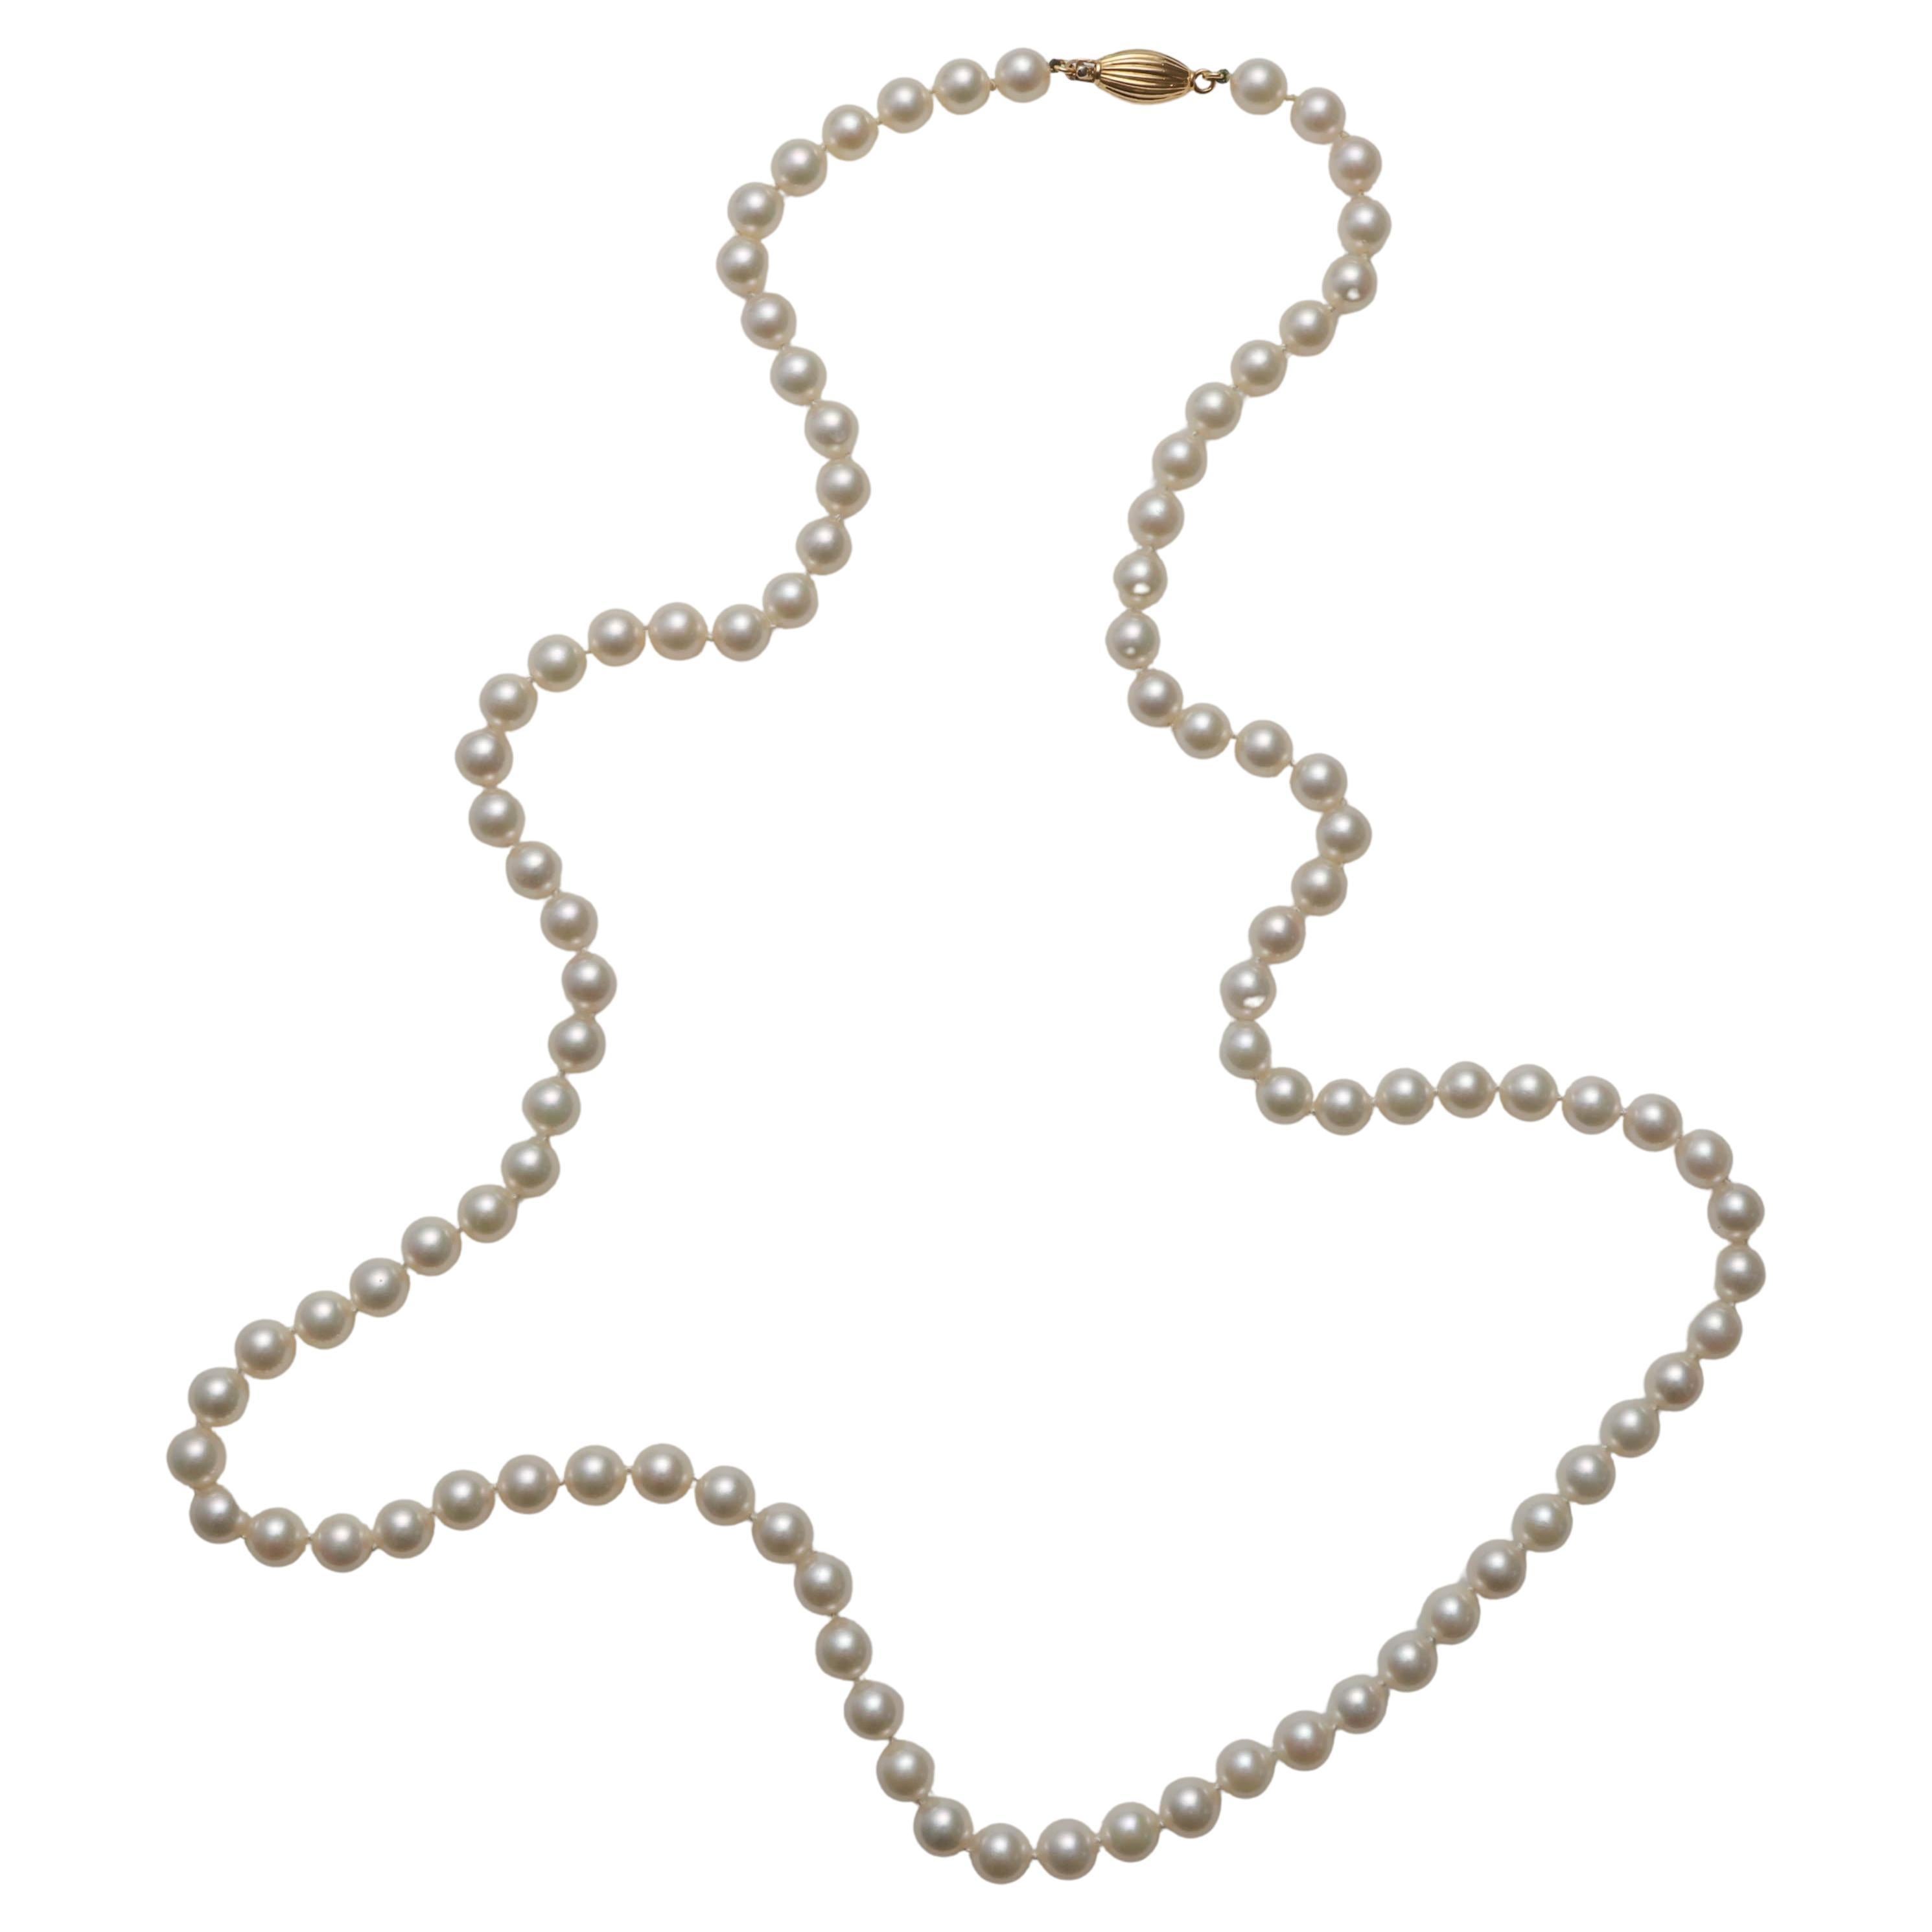 This Tiffany & Co. Akoya Pearl Necklace is a scarce treasure with complete original documentation, including the 1989 sales receipt and appraisal for $23,000 -over $56,000 in today's dollars.

The 36.5